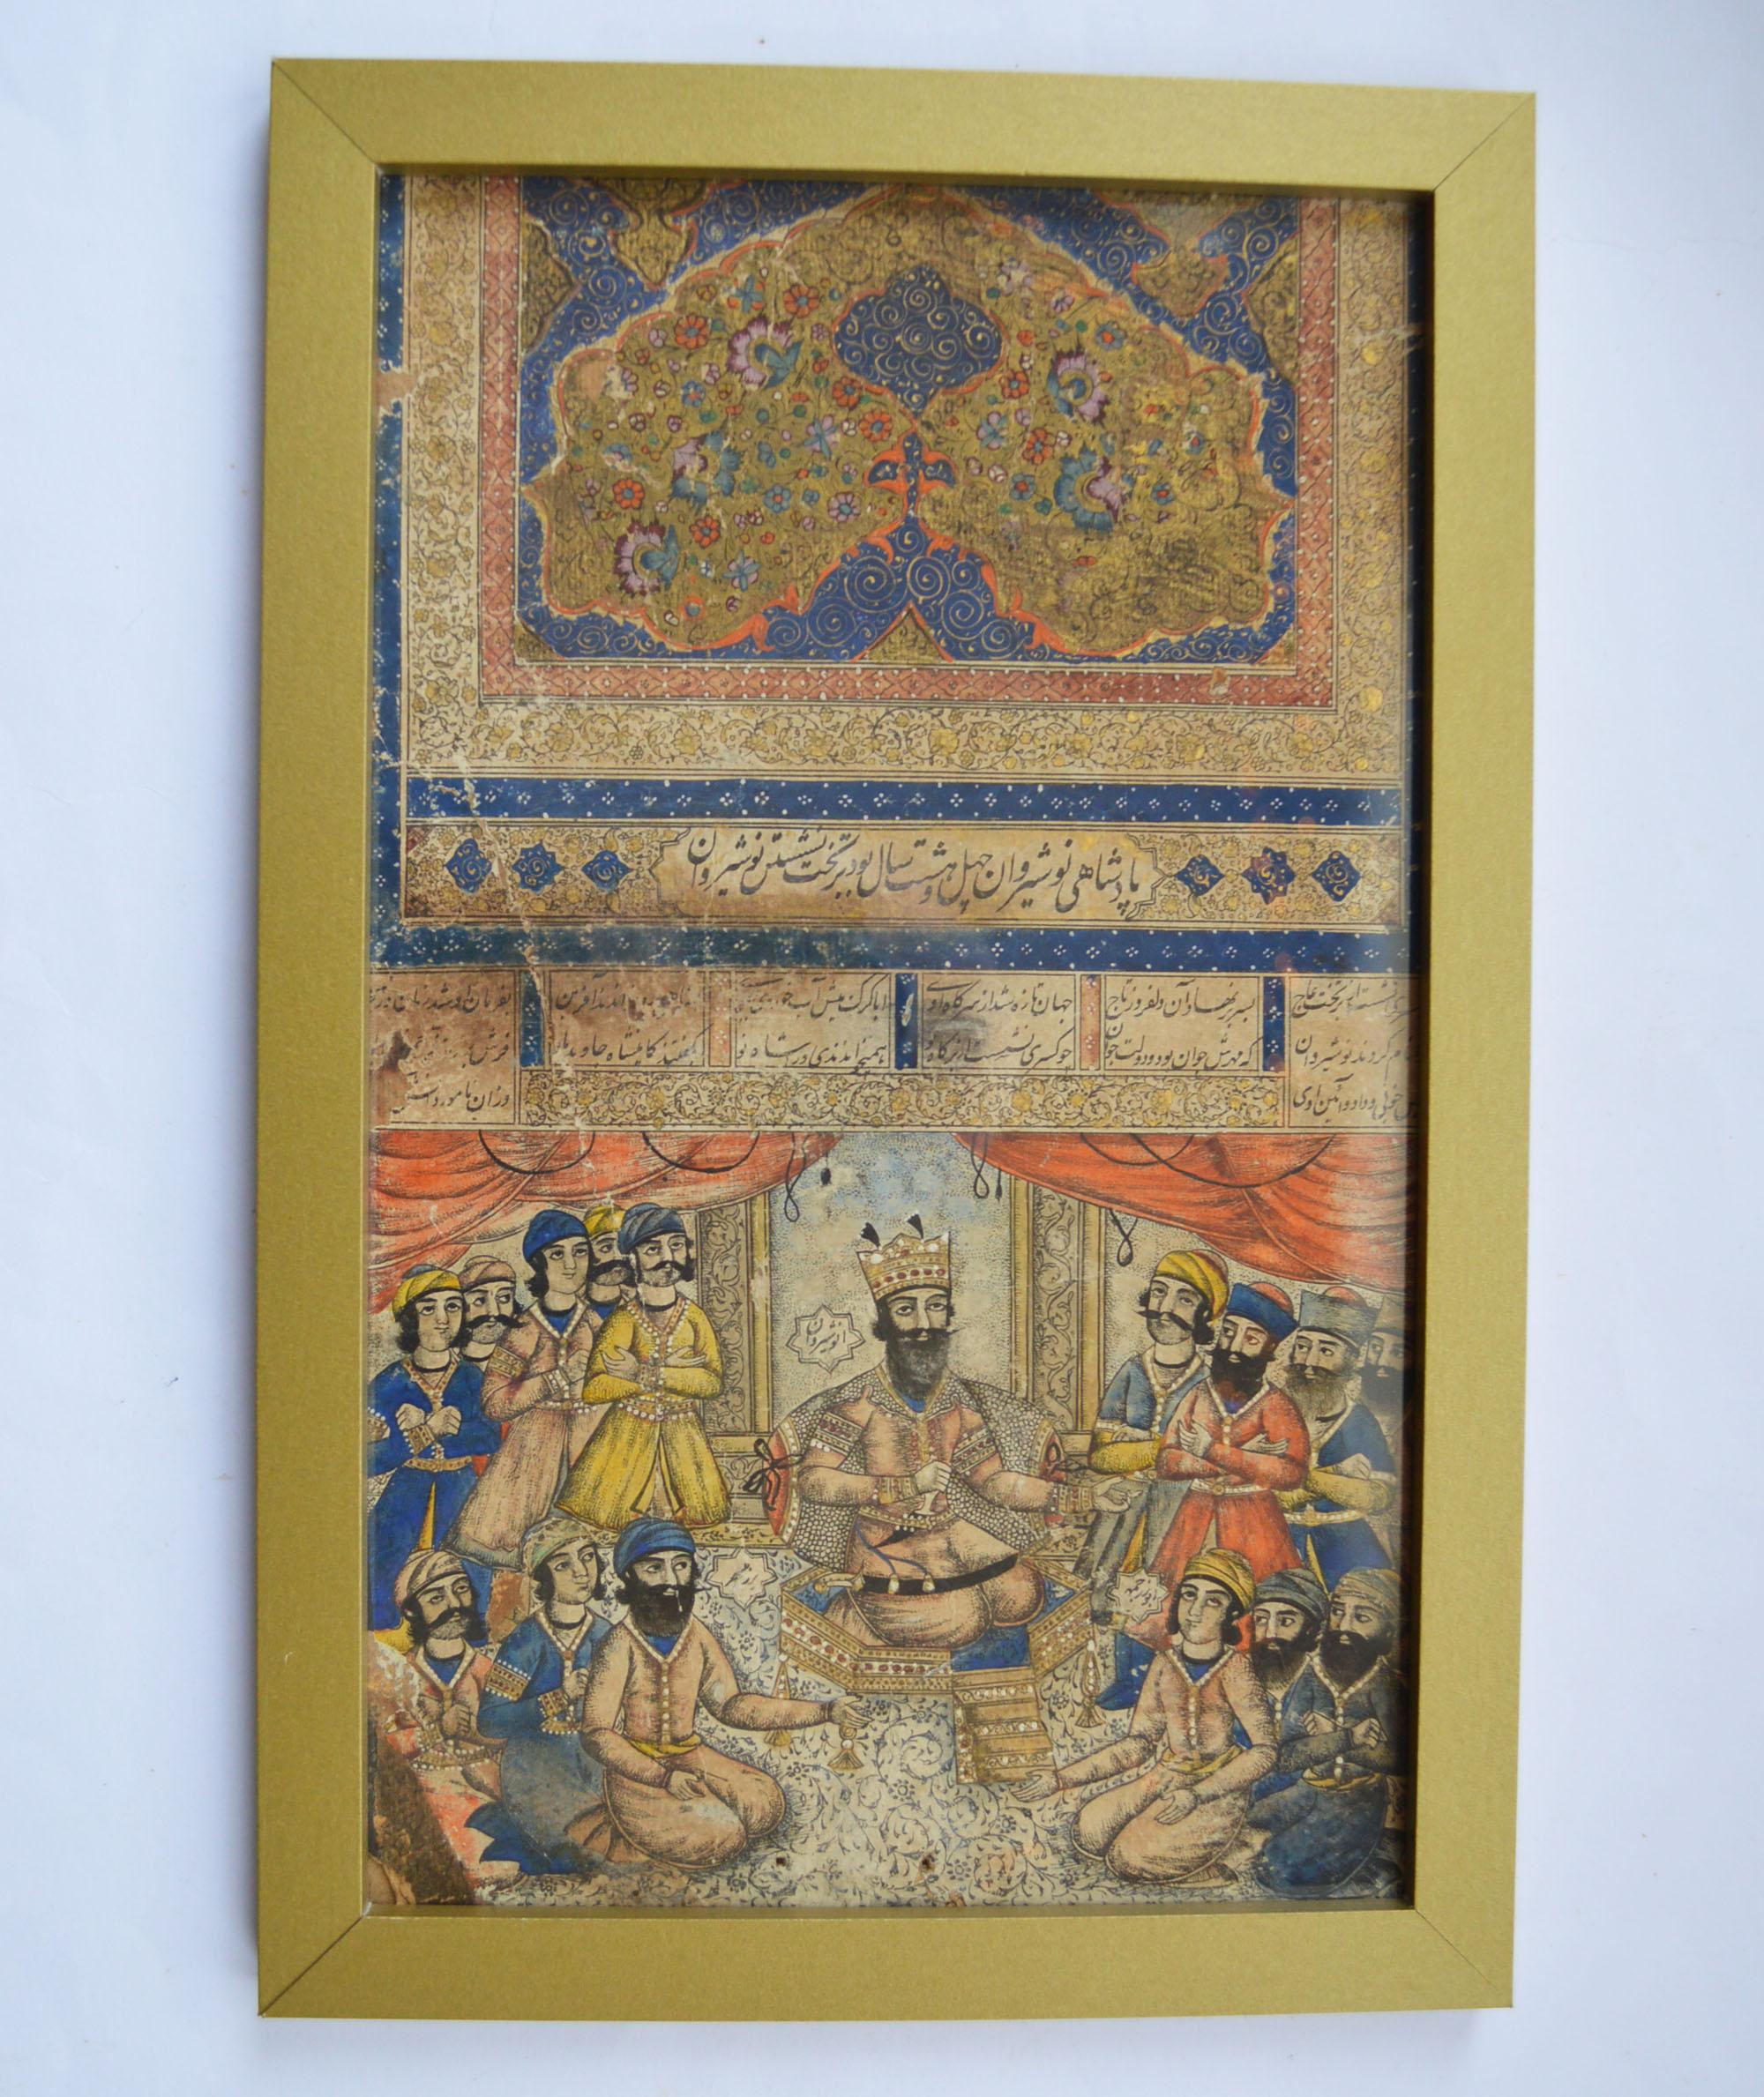 A Rare Early Islamic Illustrated book cover Antique Asian Islamic Indian Mughal Persian 17 th c
Very finely detailed hand illustrated featuring a king in his palace with his courage with Islamic scripts,
Presented  in a simple photo frame. 
Height